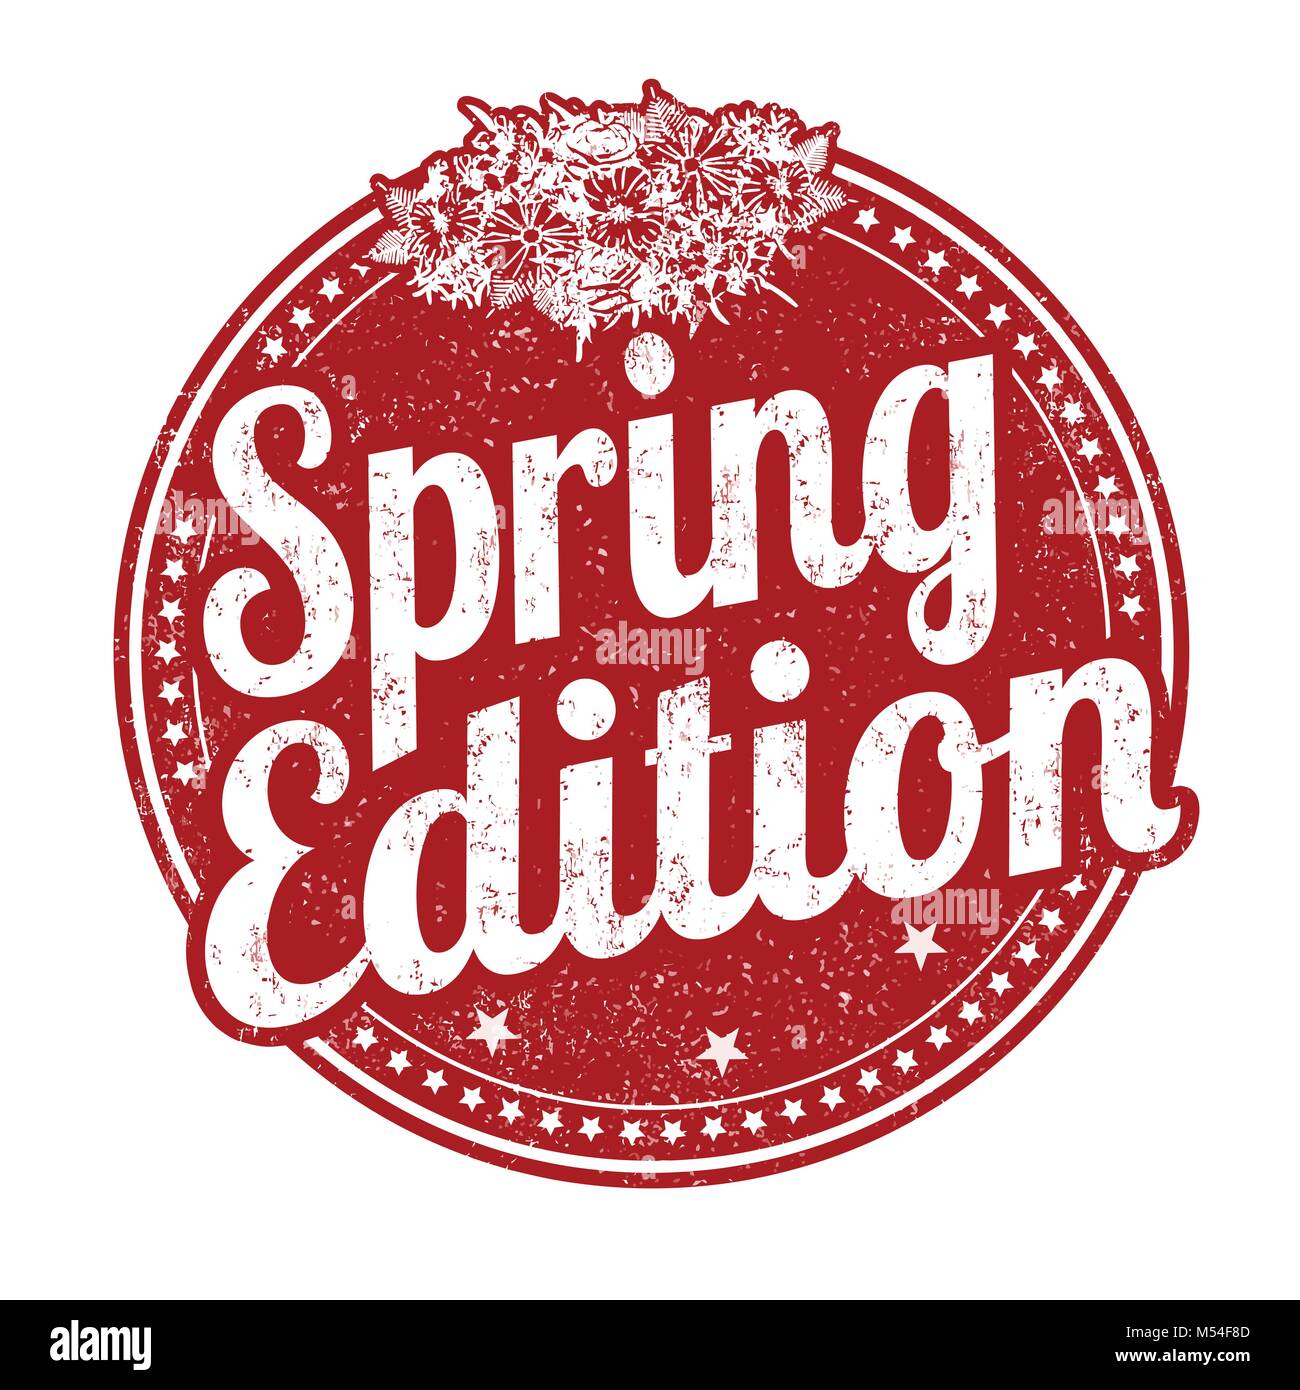 Spring edition label or sticker on white background, vector illustration Stock Vector